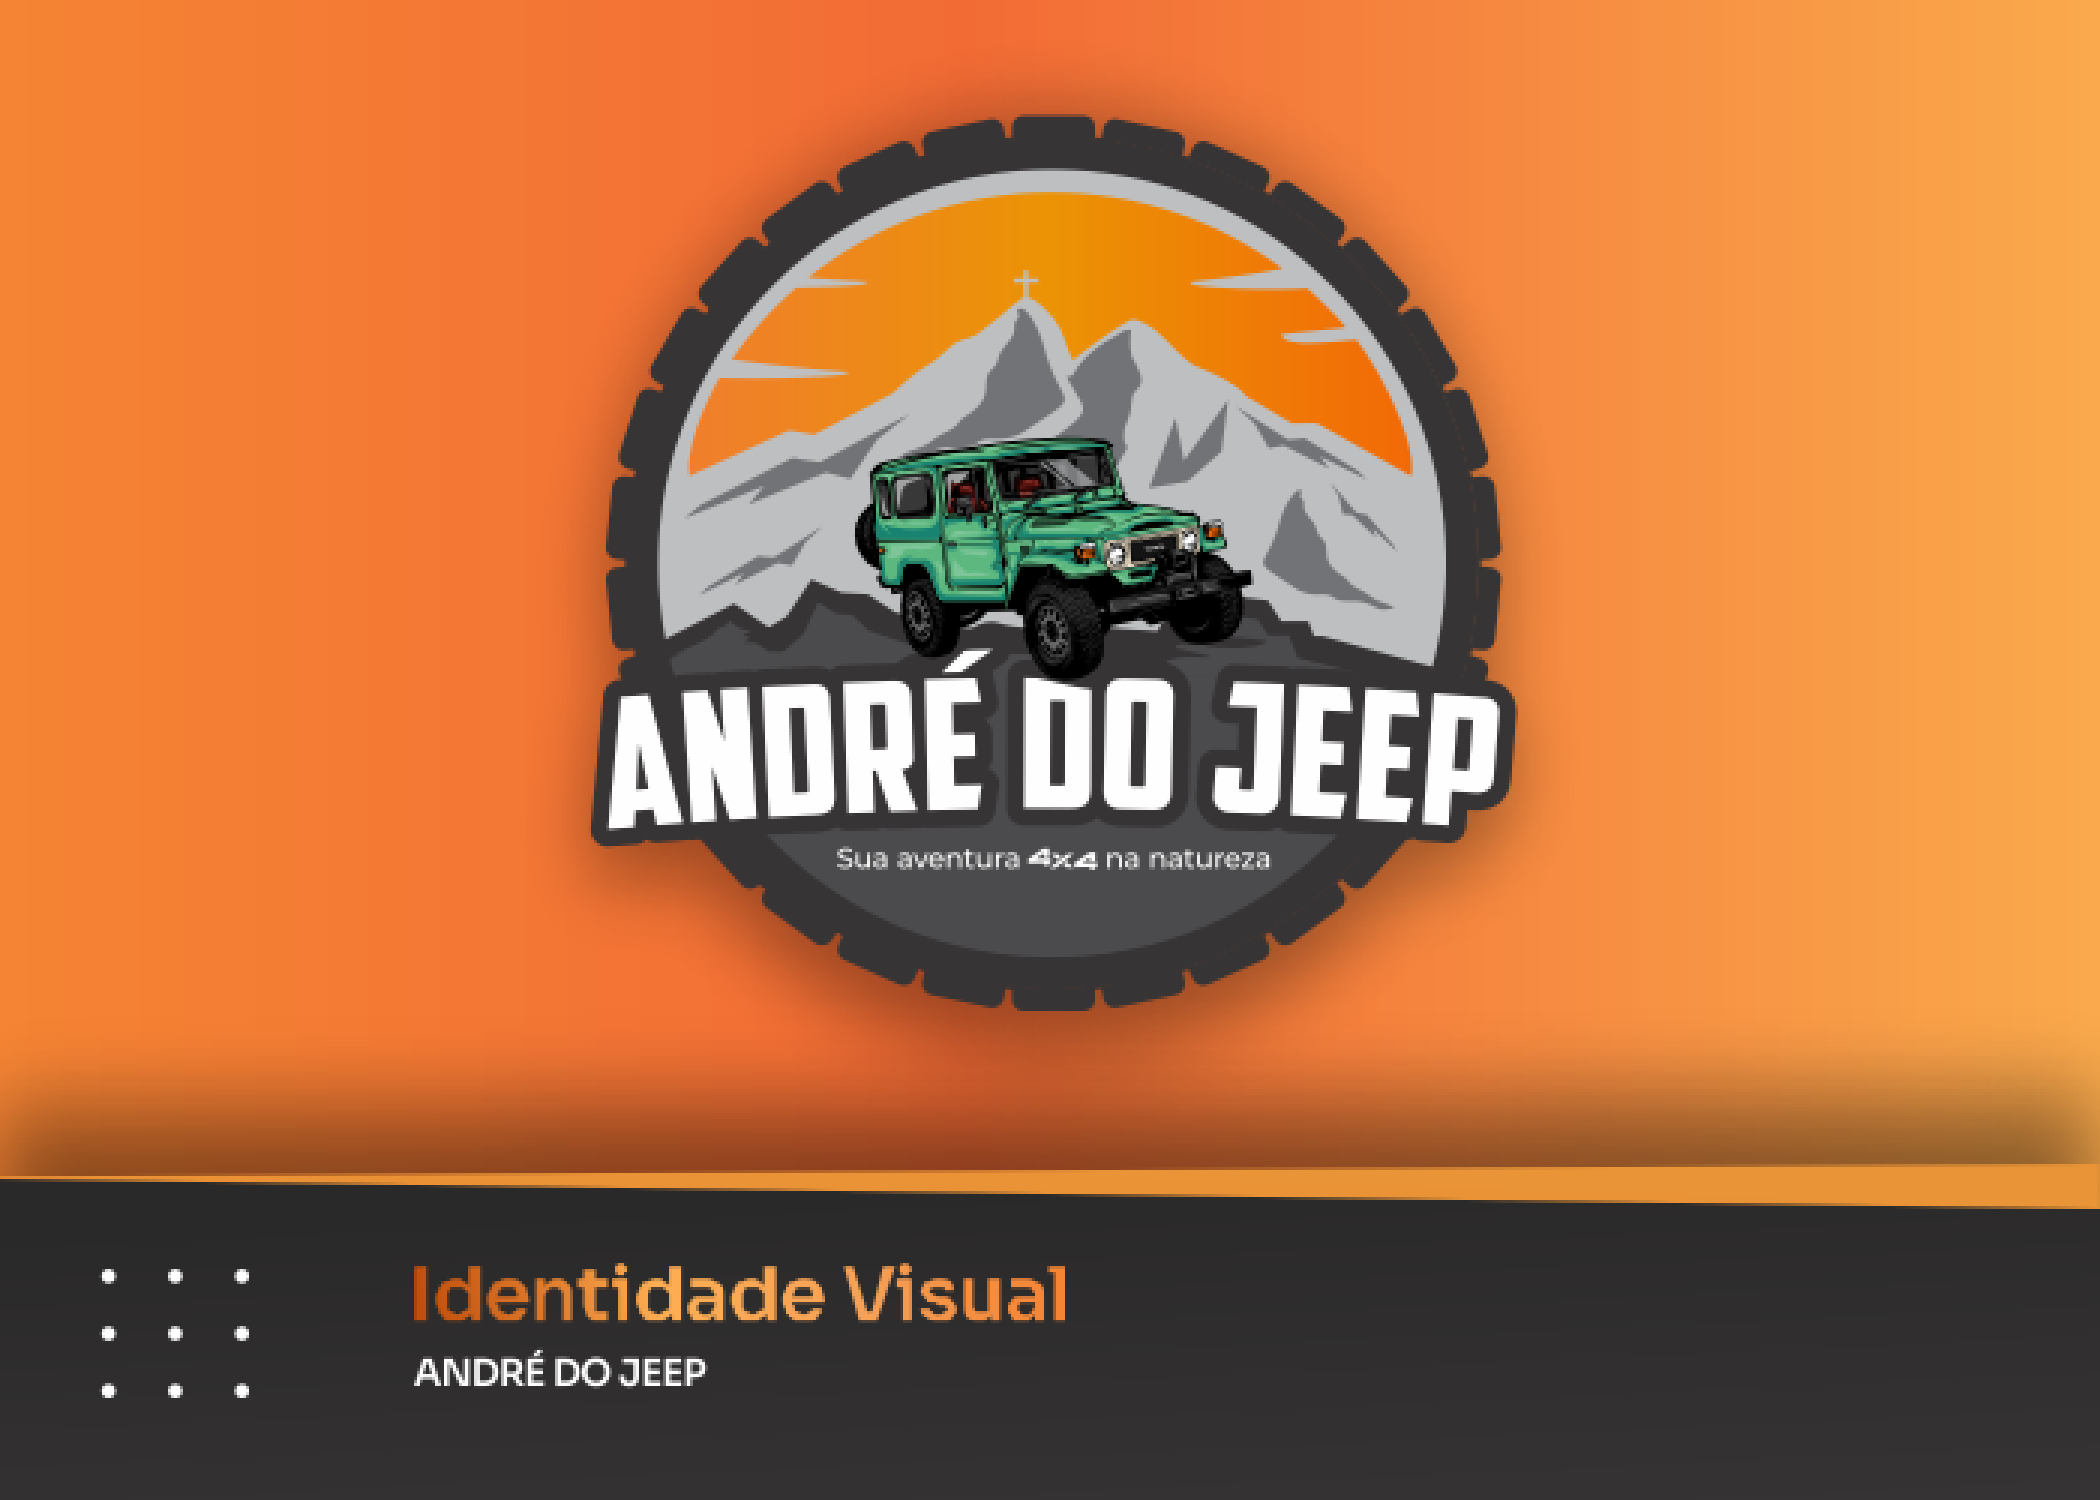 ANDRÉ DO JEEP